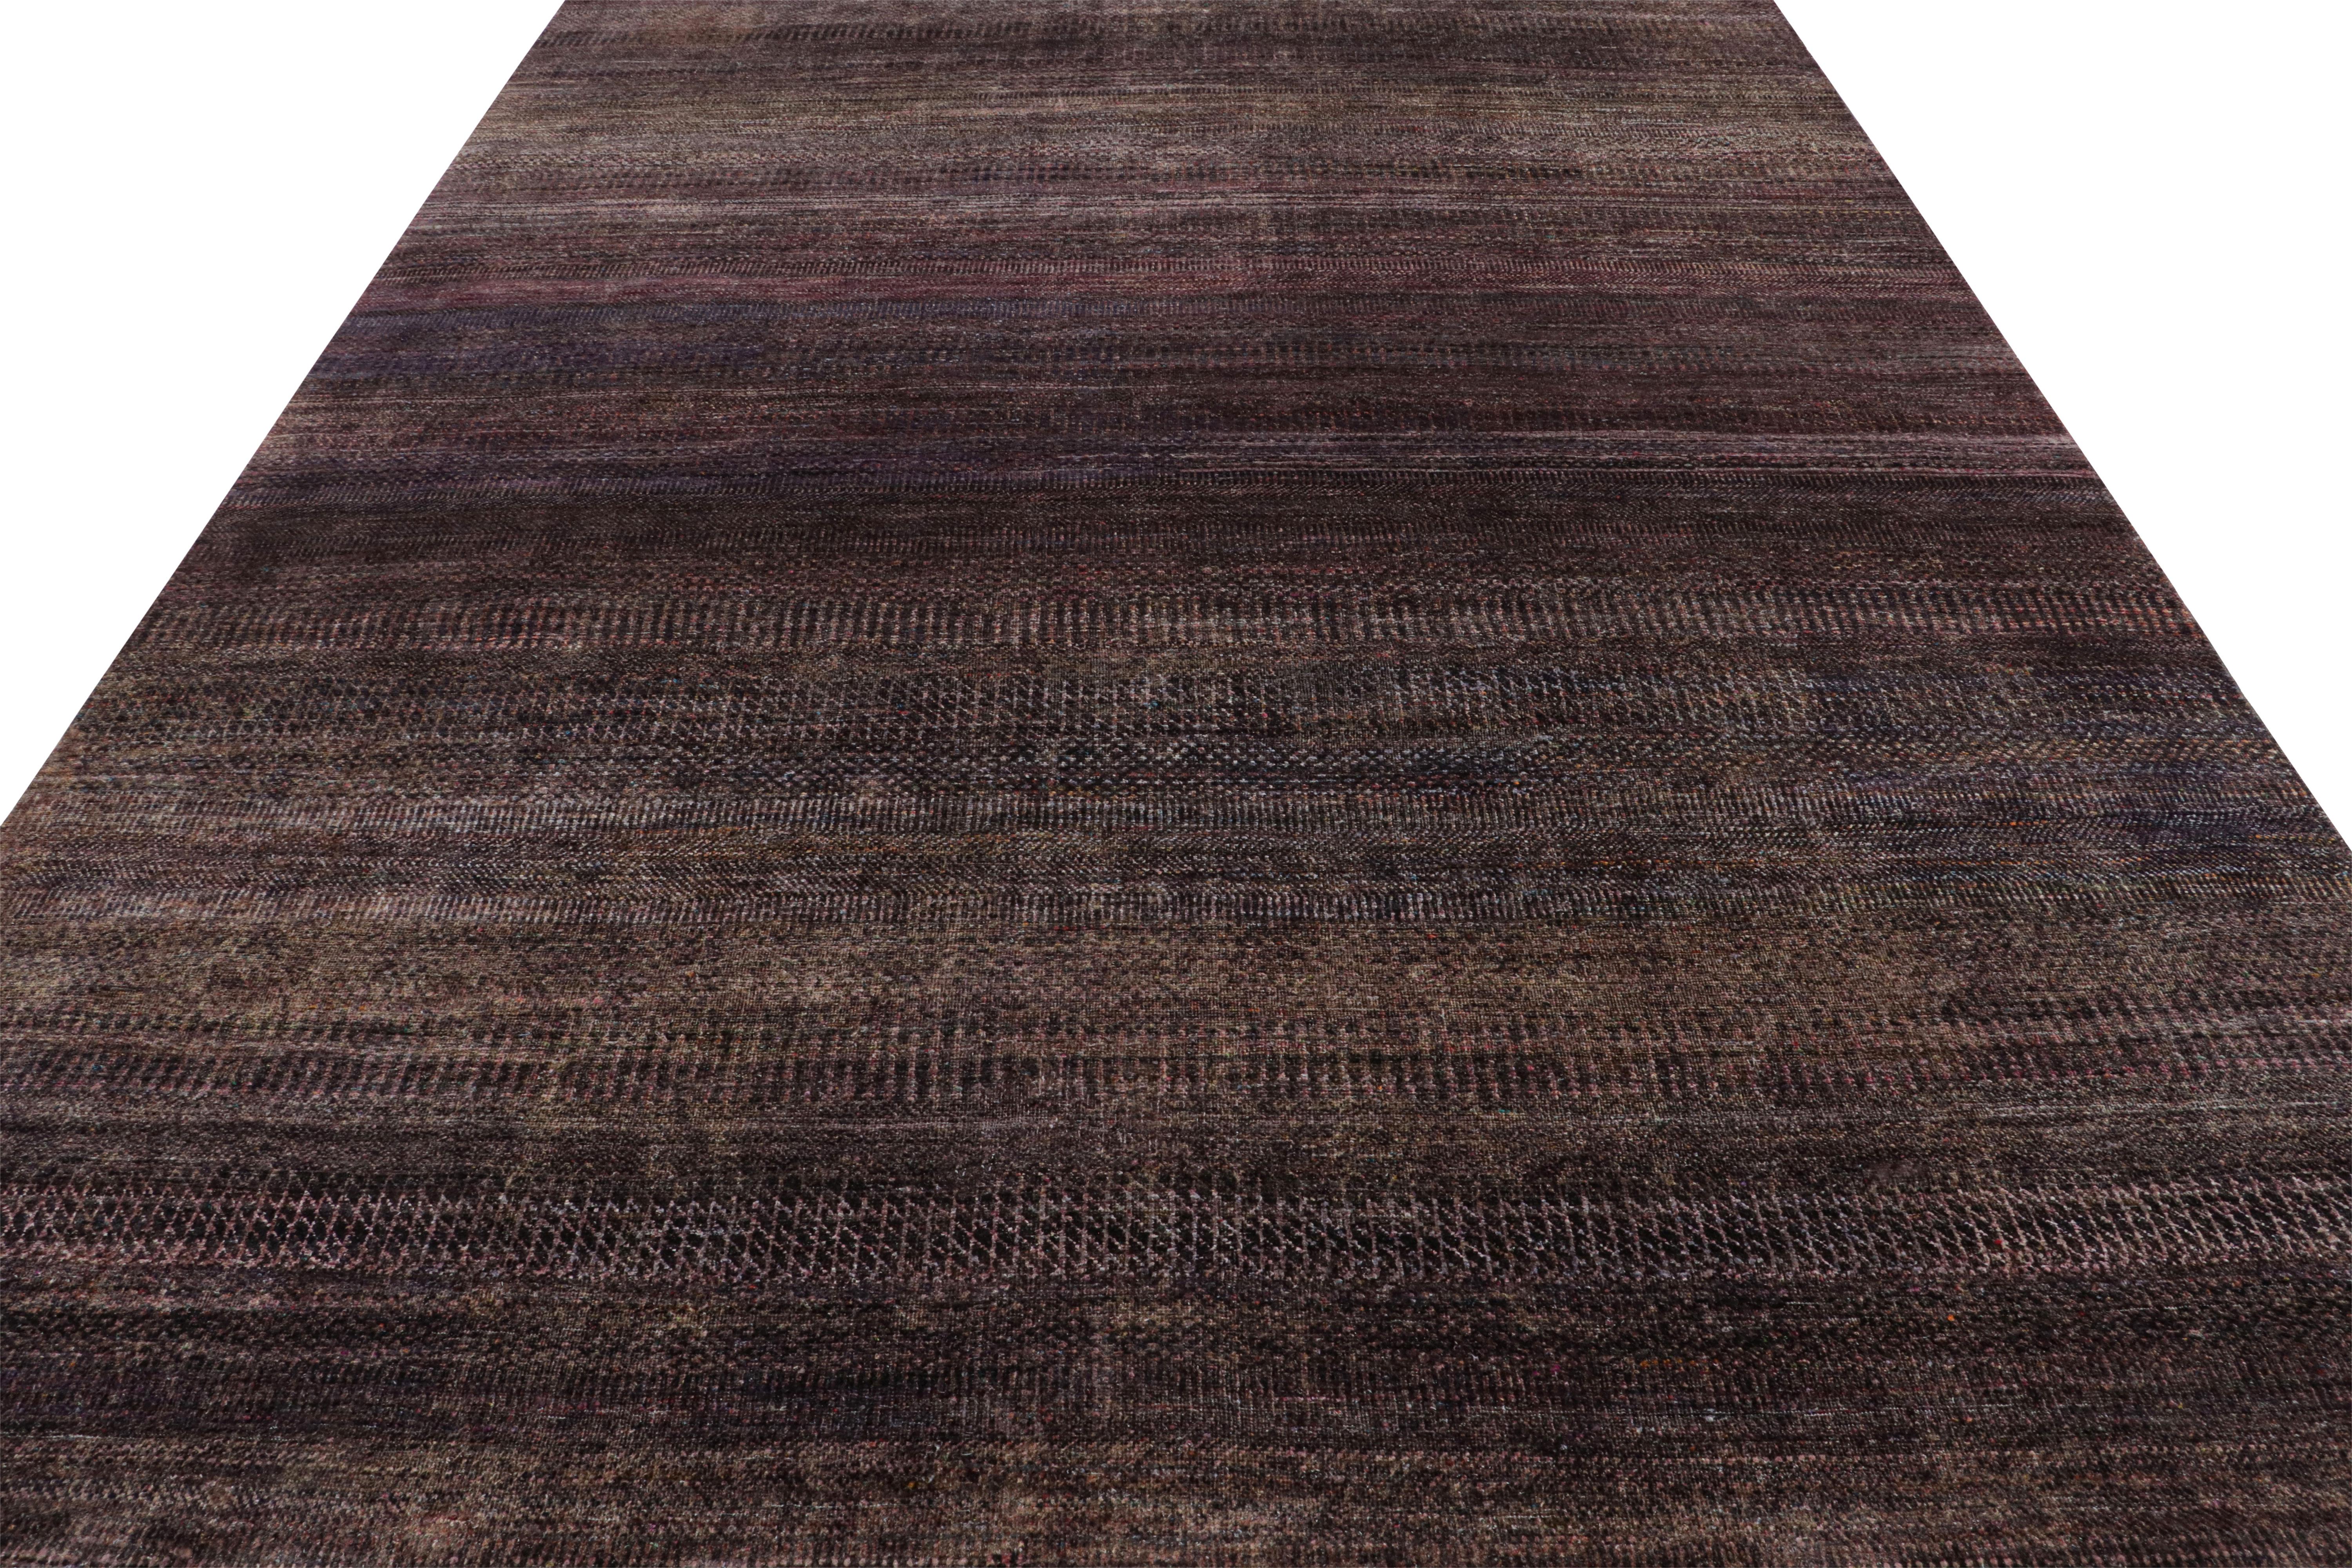 Rug & Kilim’s Modern Textural Rug in Purple Tones and Polychrome Striae In New Condition For Sale In Long Island City, NY